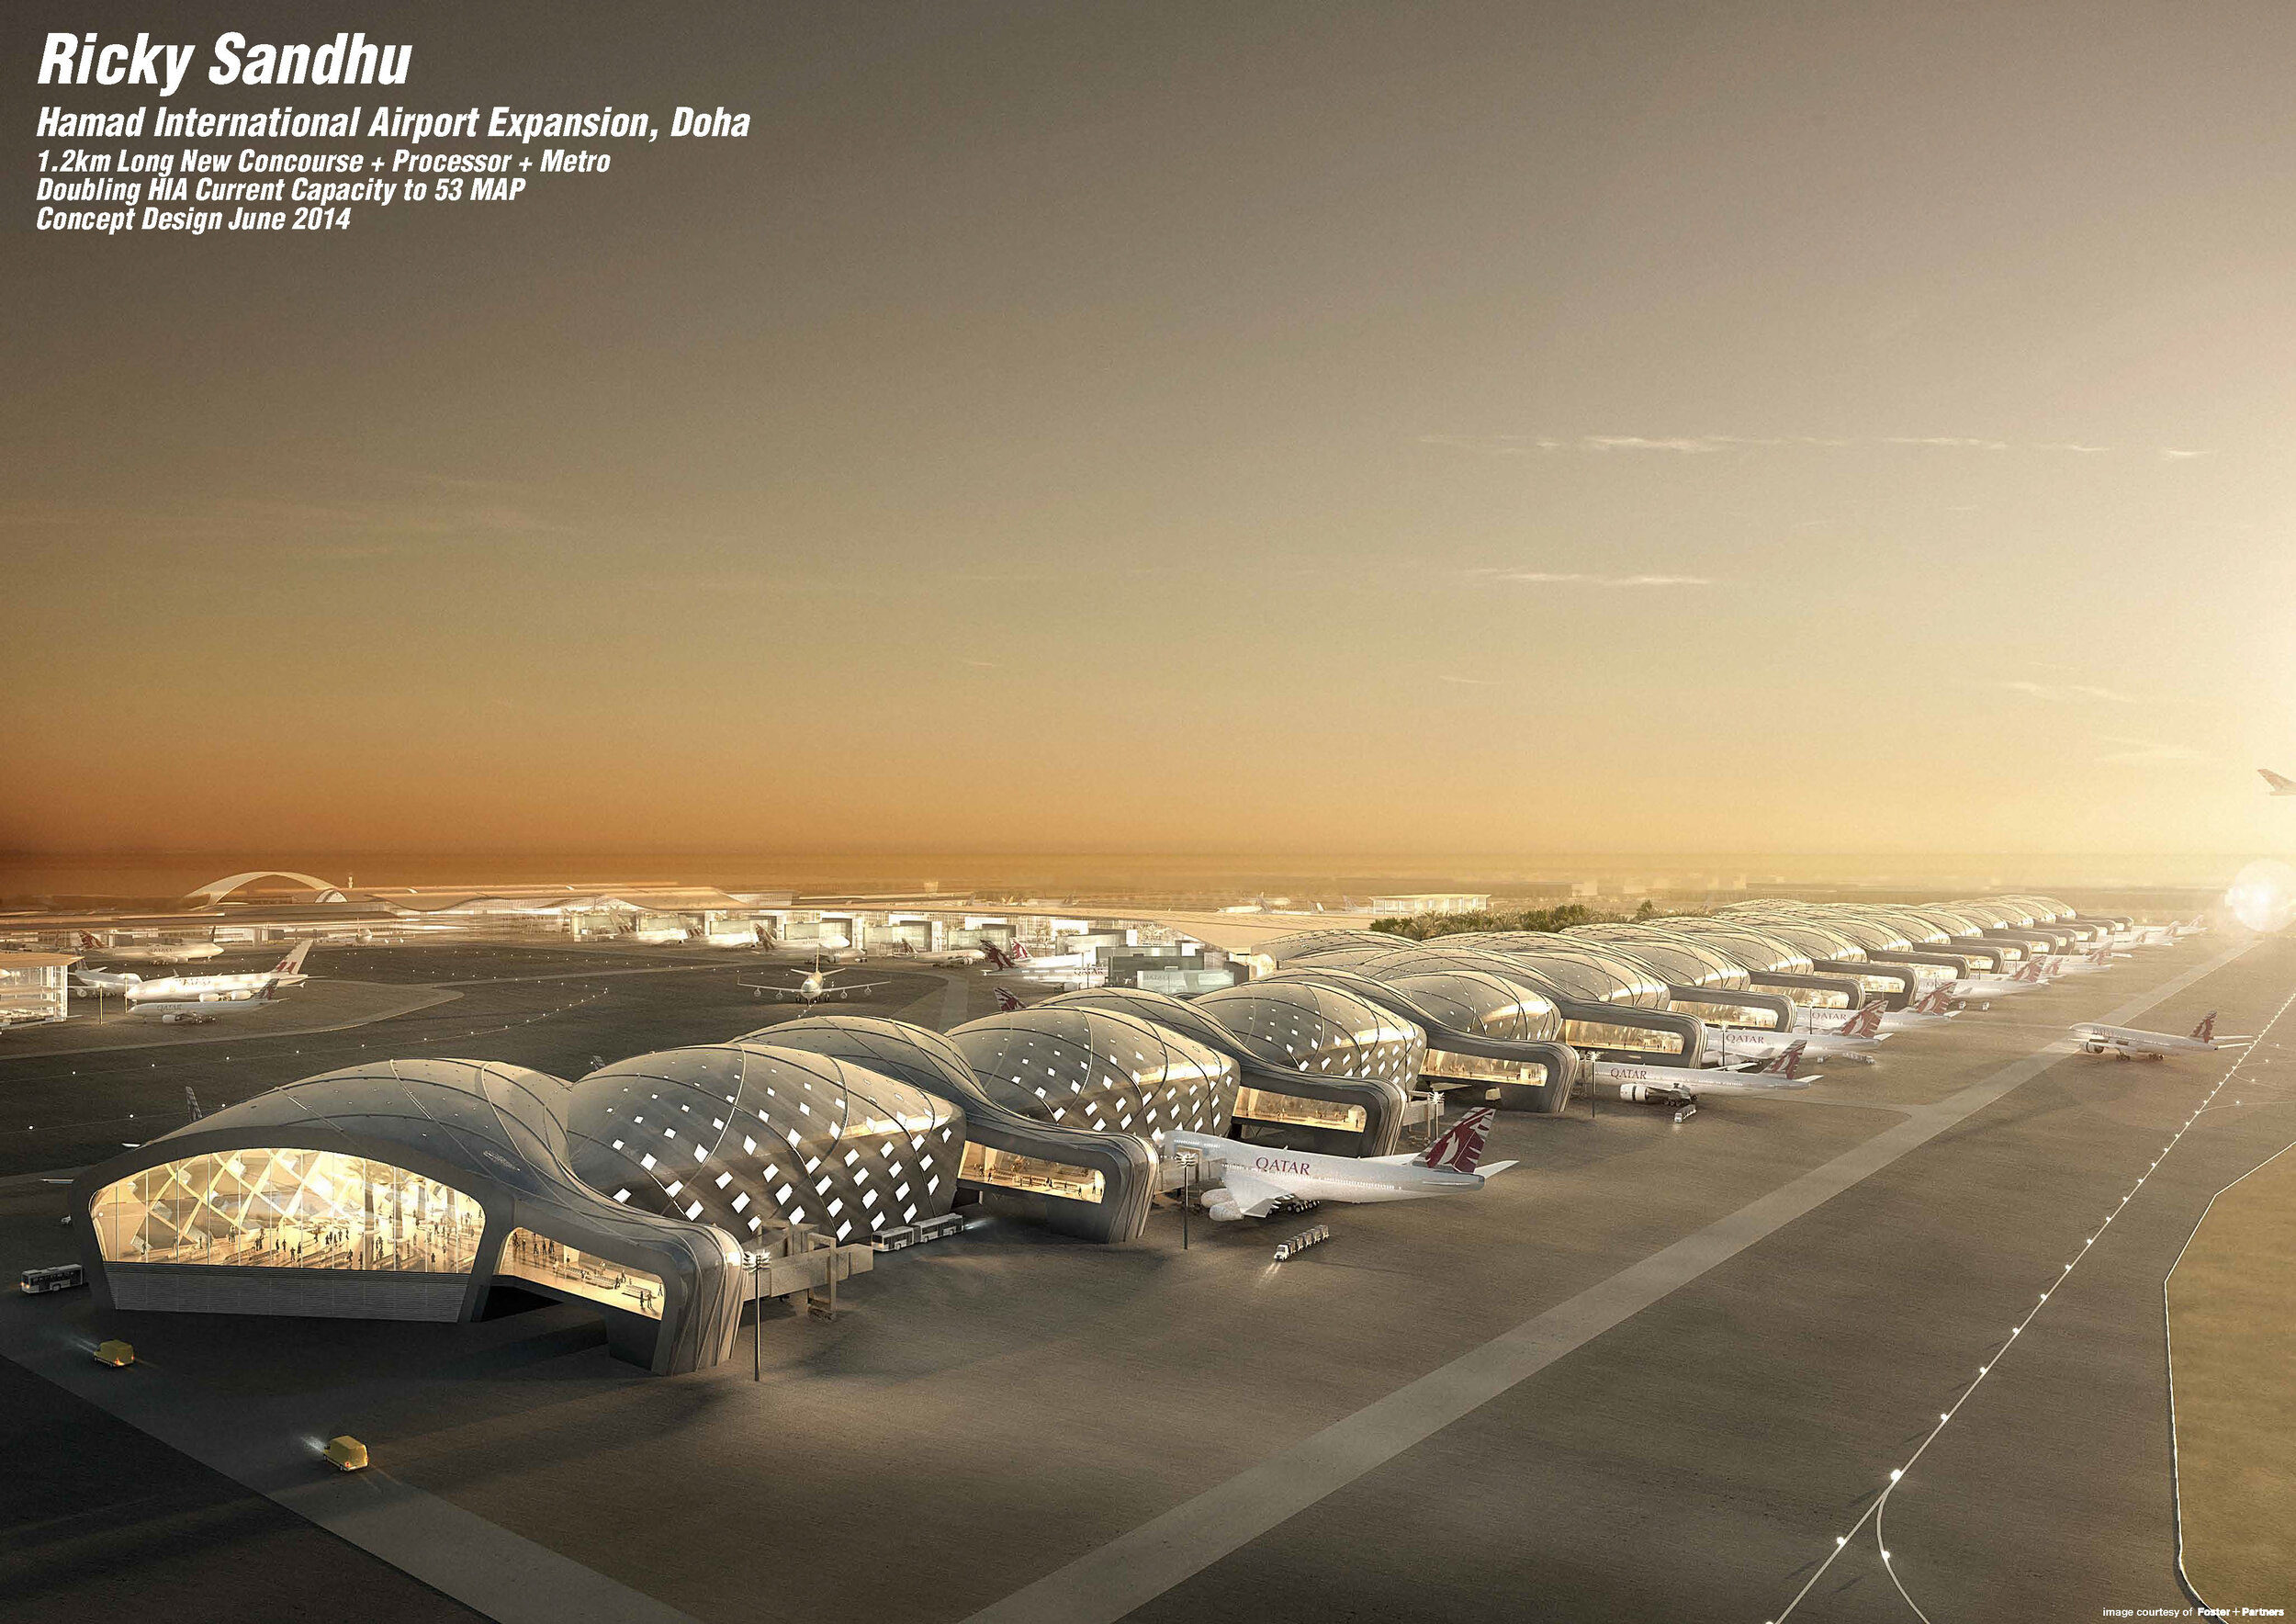 Hamad International Airport Expansion, Doha (Foster + Partners)